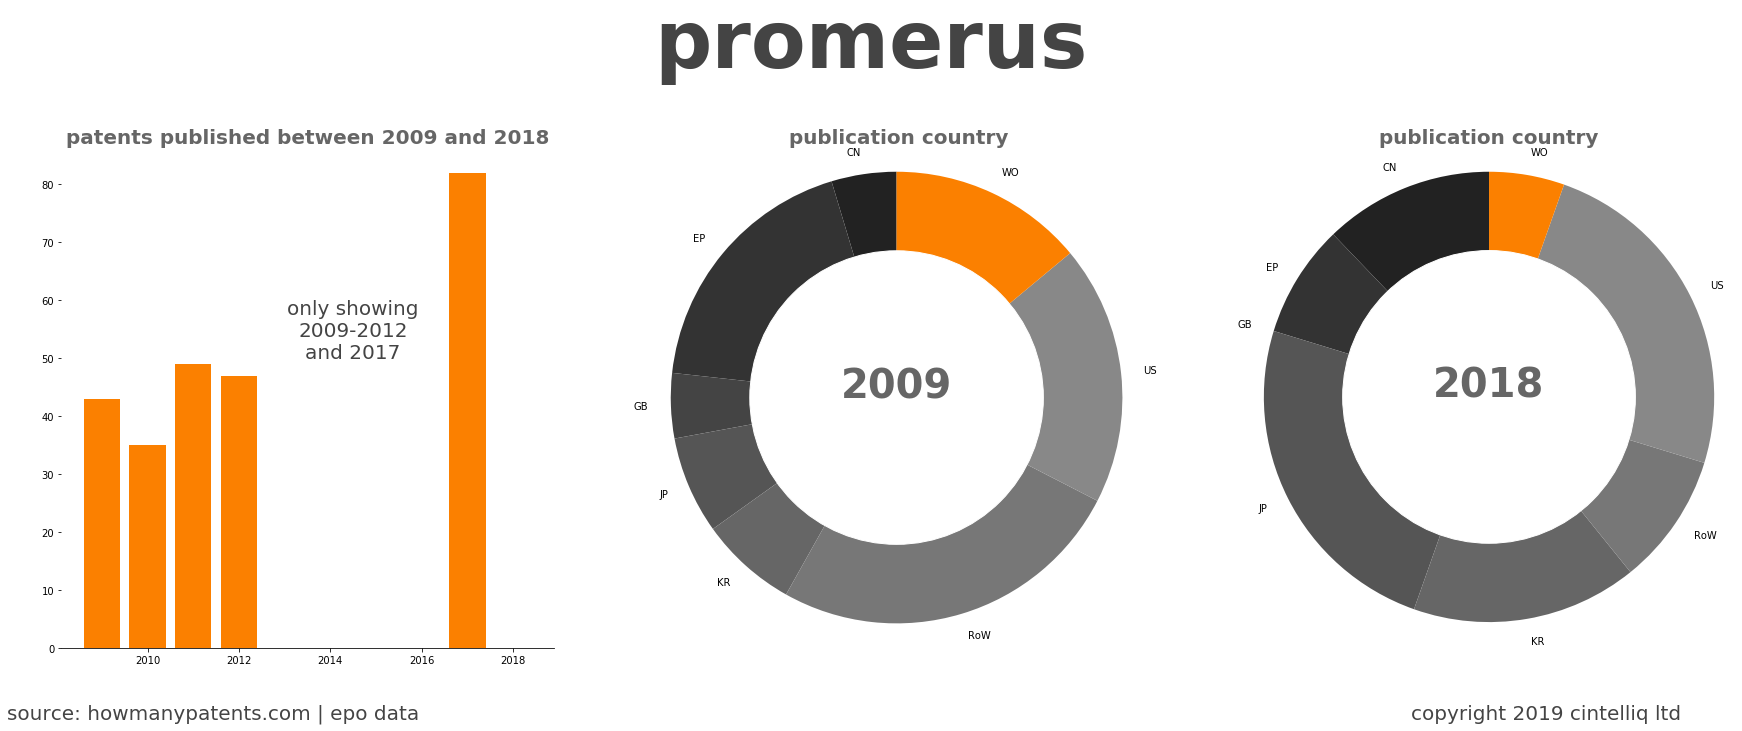 summary of patents for Promerus